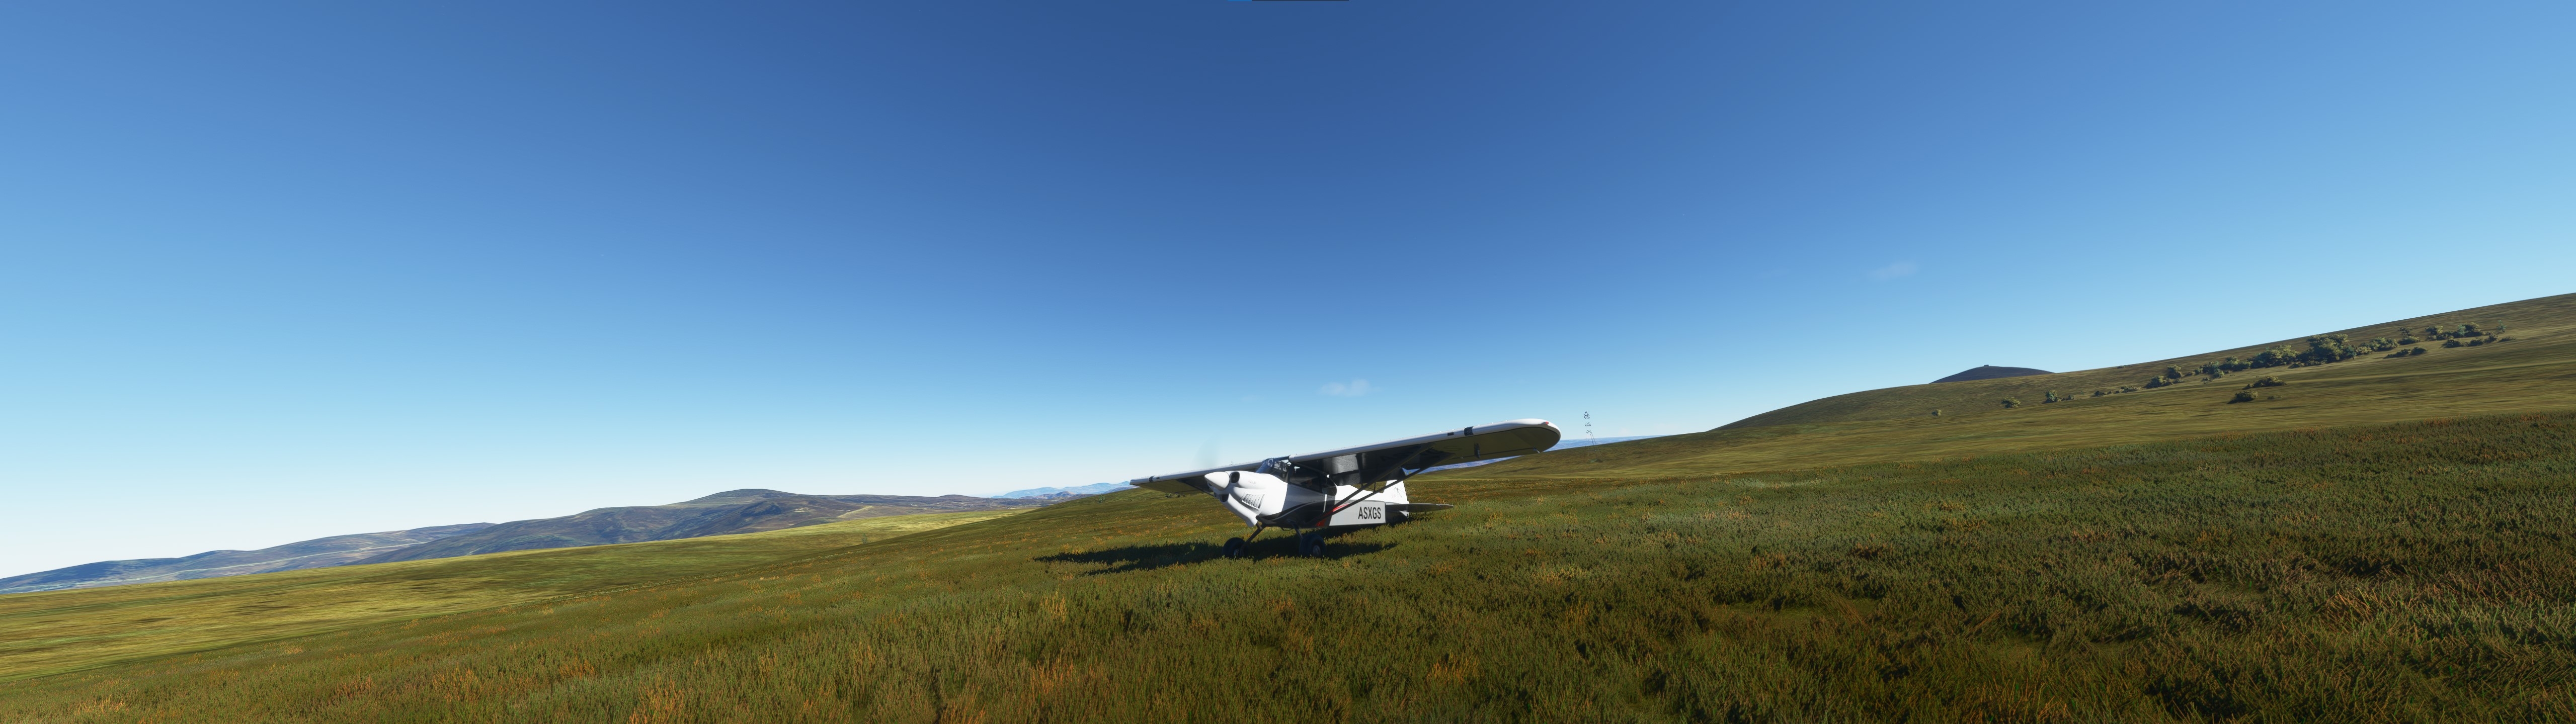 Photo free aircraft, field, game landscape